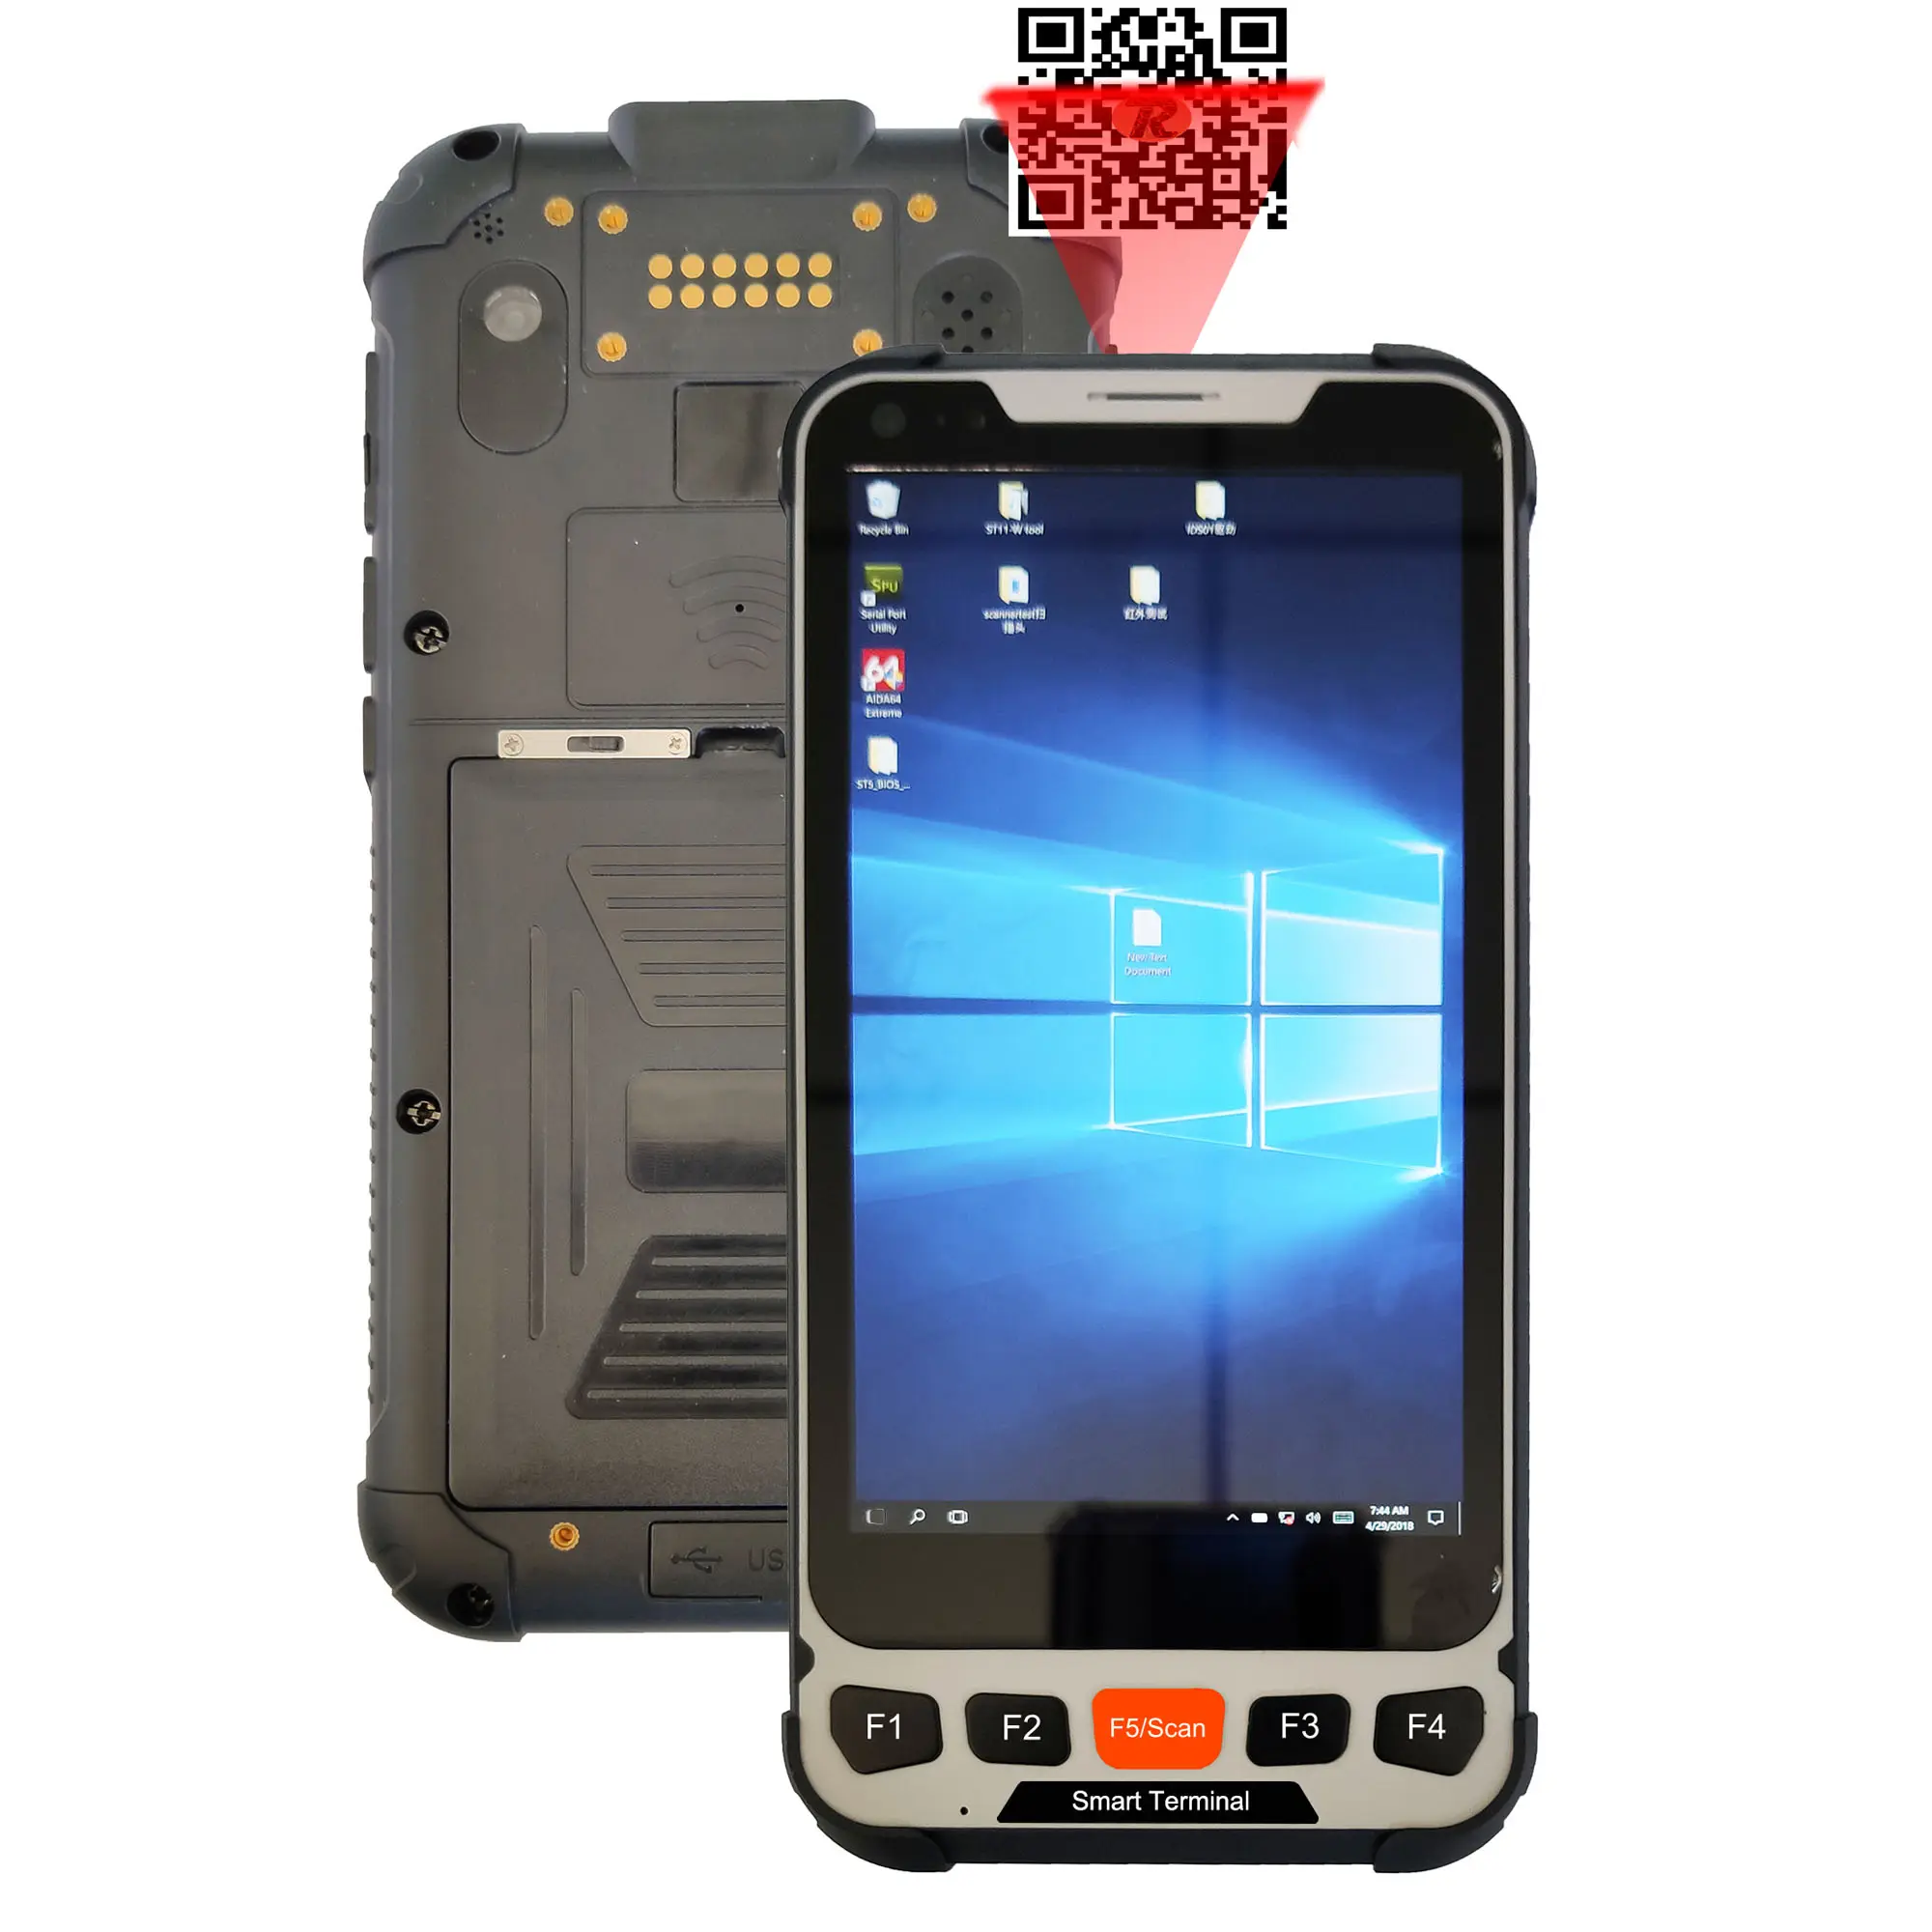 5.5 inch win 10 Mobile terminal pc with 2D scanner Barcode, Ram 4GB Rom 64GB, Handheld Terminal PC with NFC USB 3.0 port